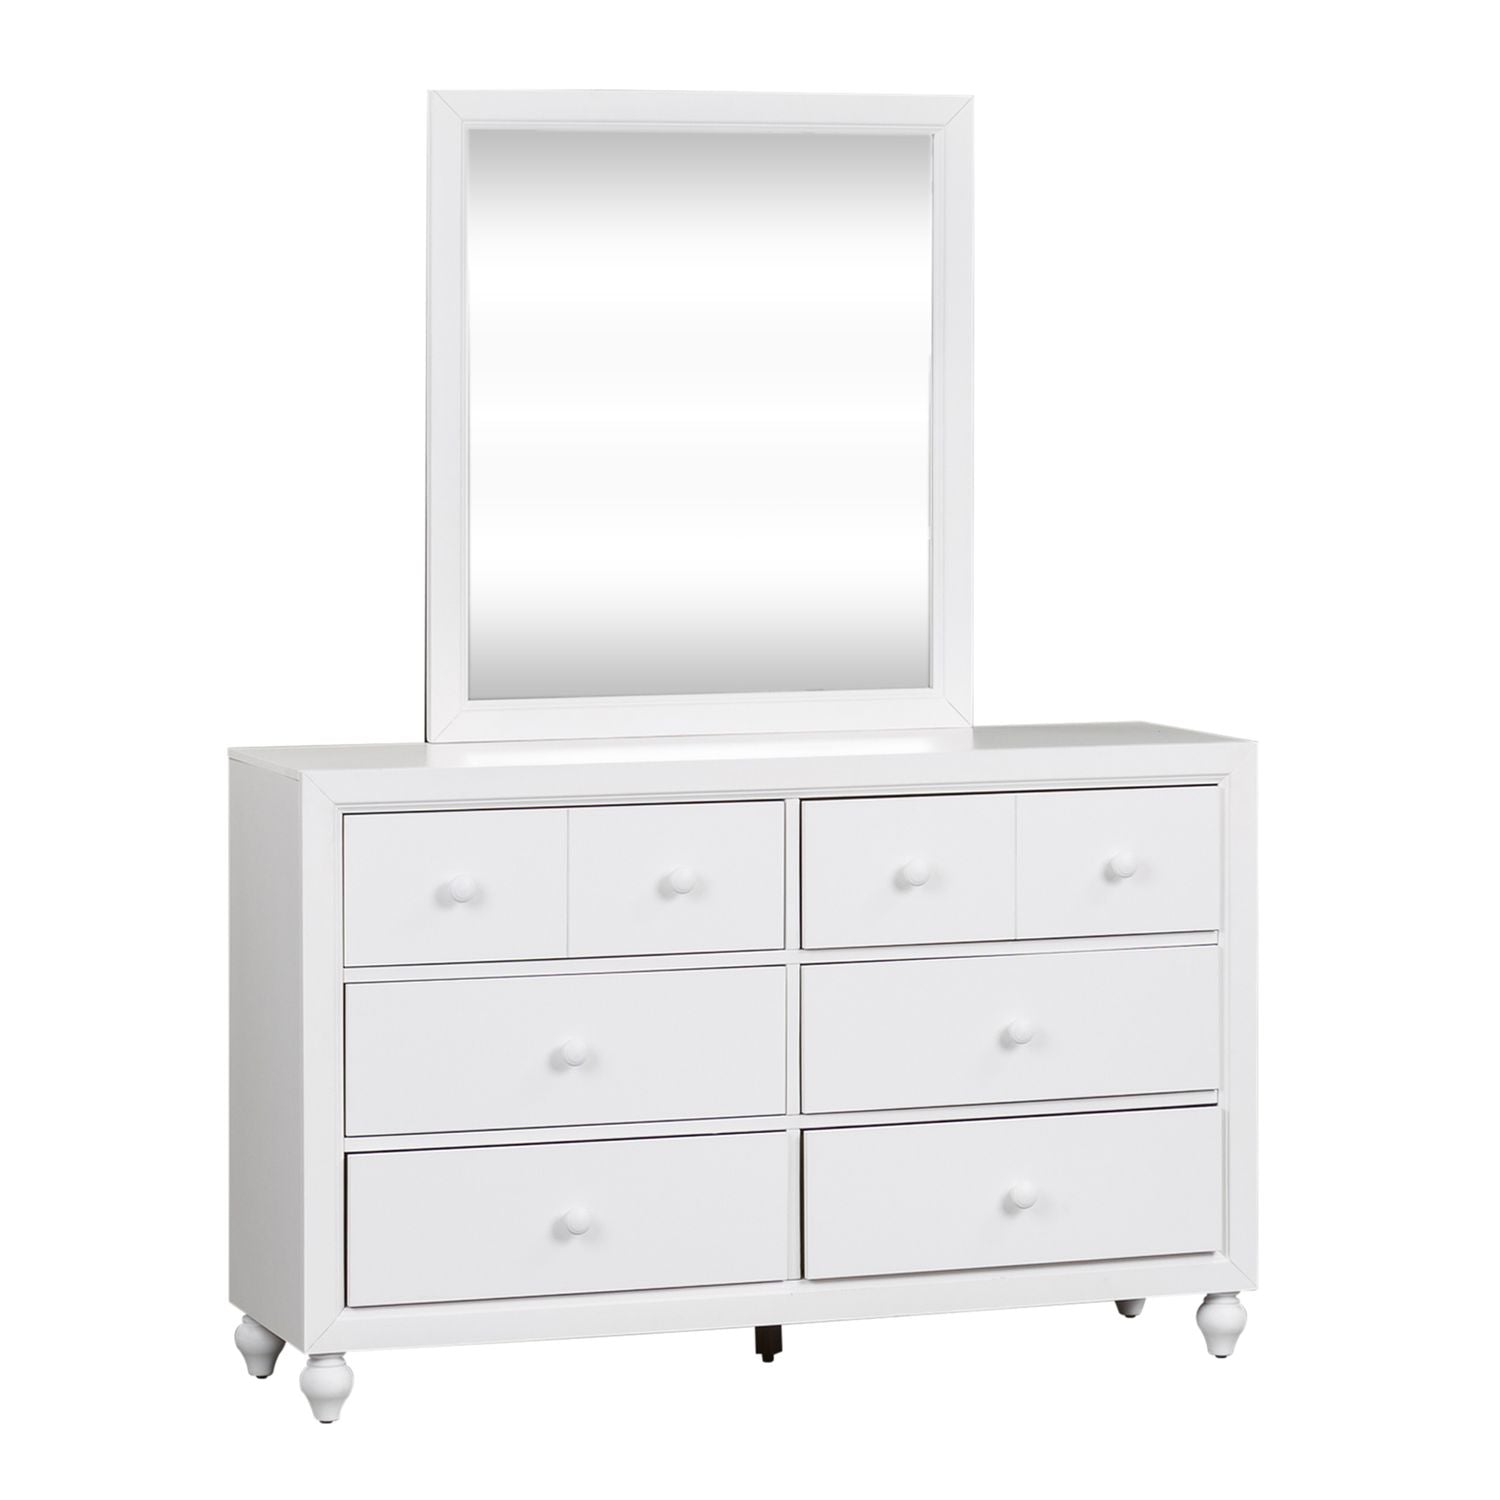 Cottage View Youth White Collection by Liberty Furniture